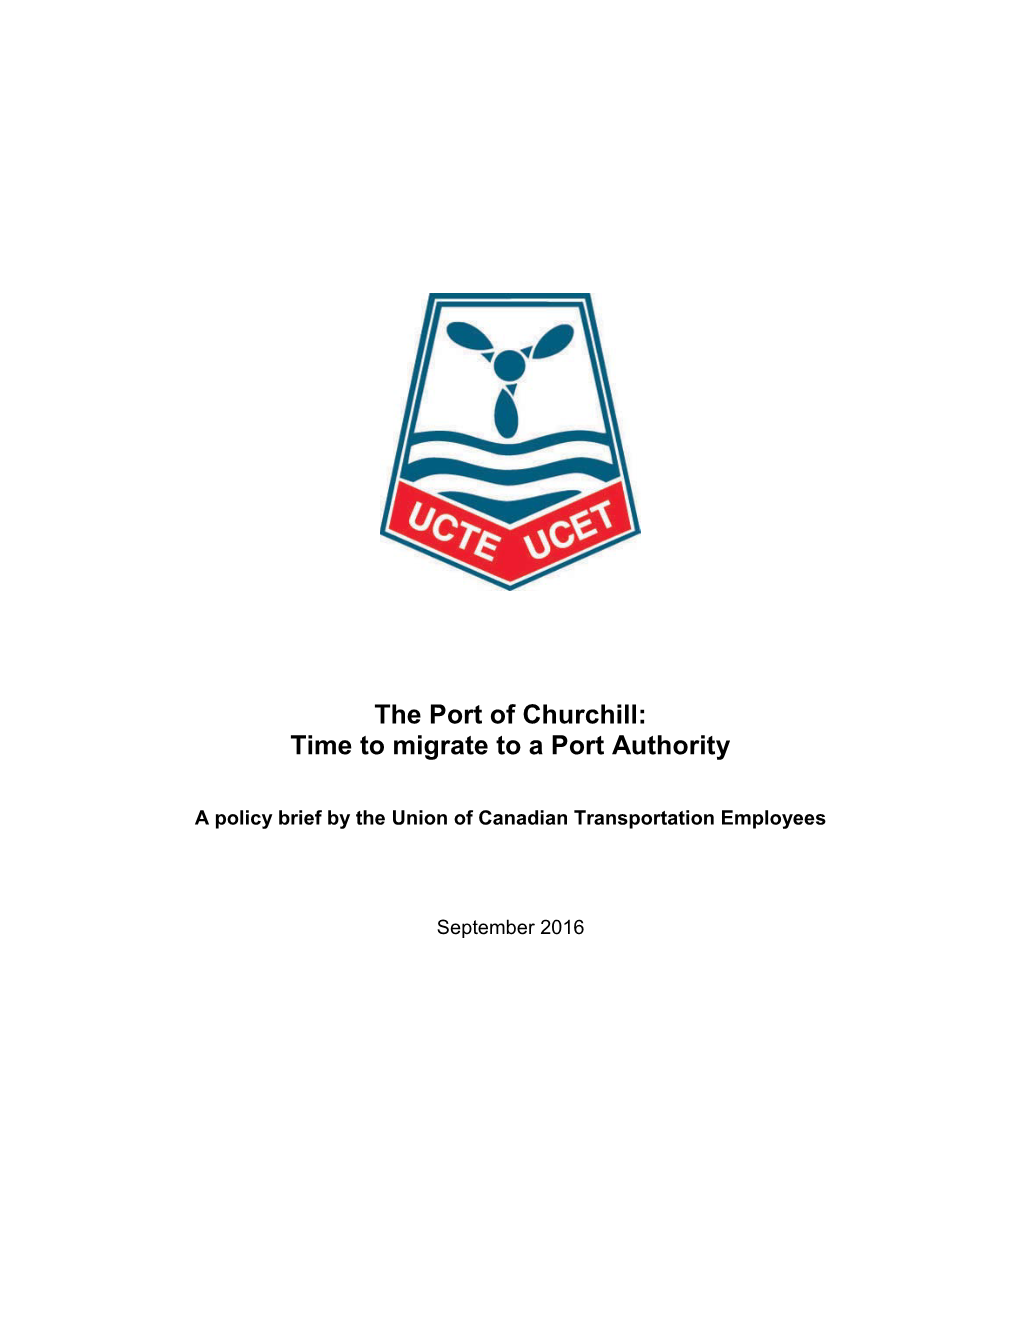 The Port of Churchill: Time to Migrate to a Port Authority